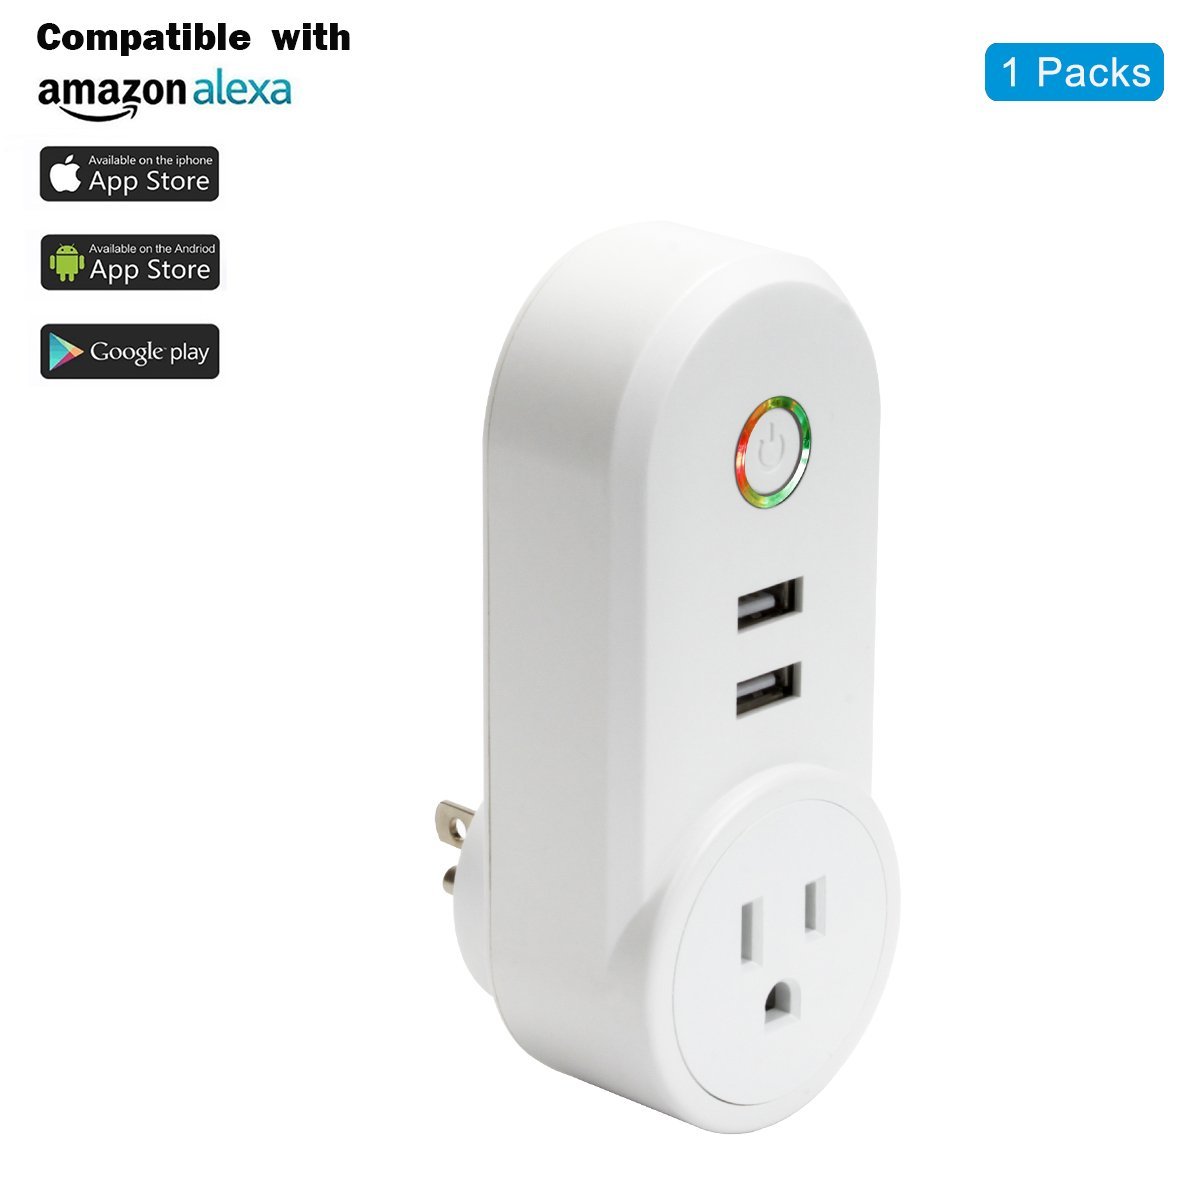 ANNBOS Usb WiFi Outlet Smart Plug Compatible with Alexa, Google home